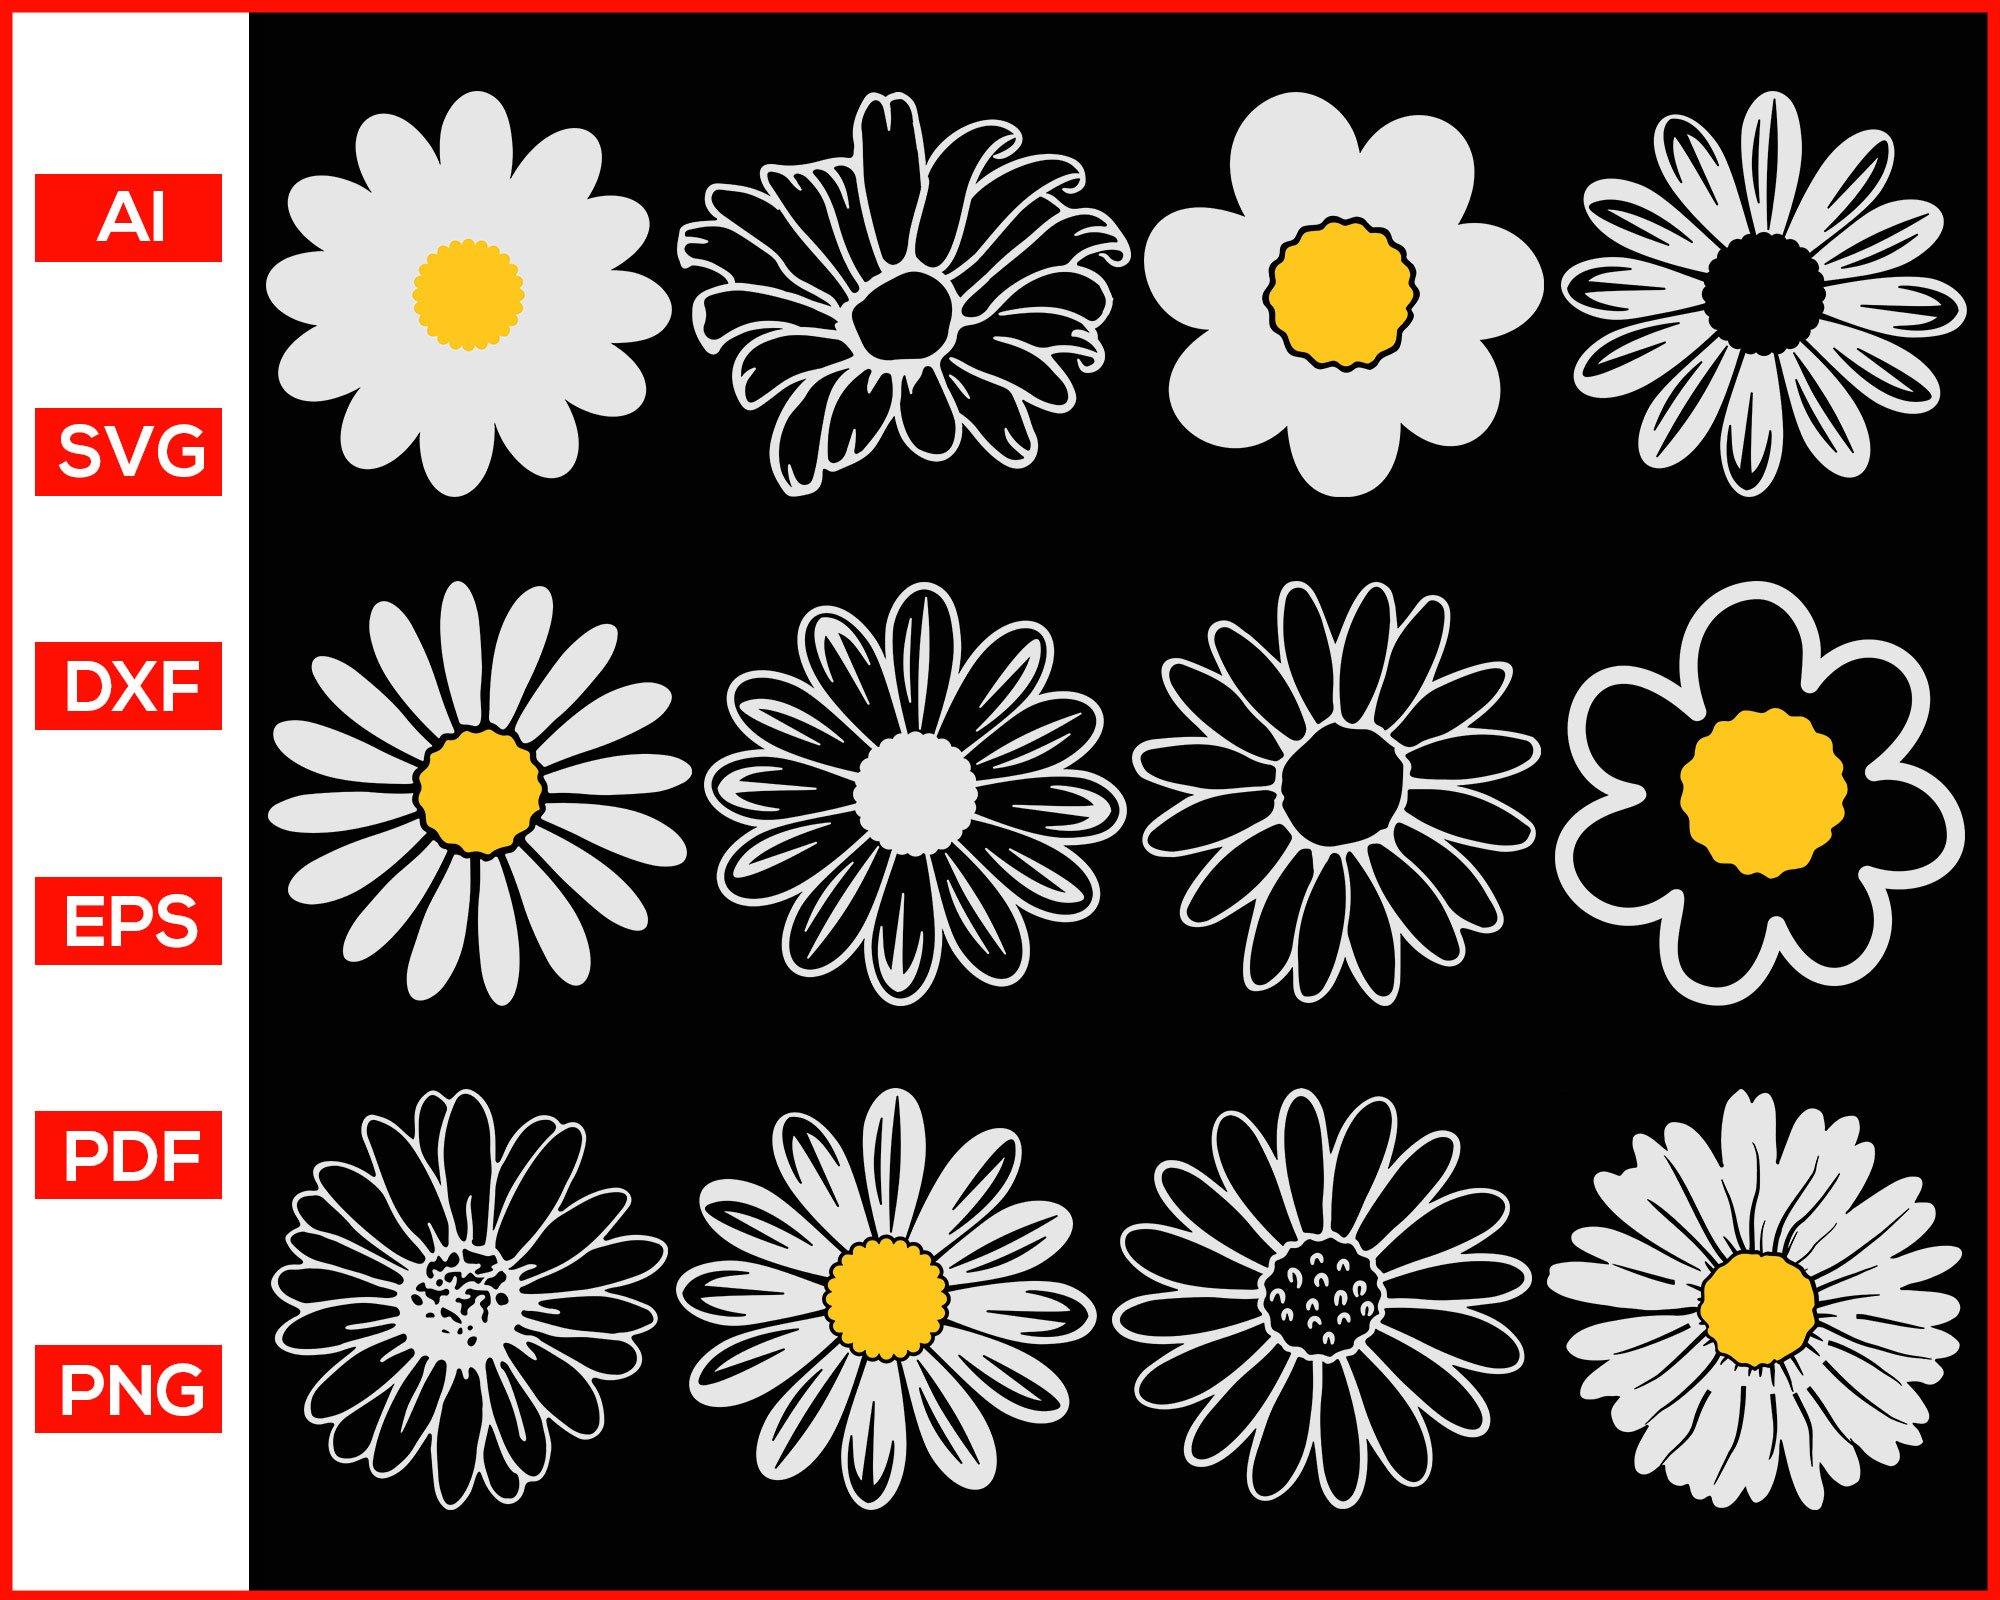 Download Art Collectibles Clip Art Daisy Cutting Files Daisy Svg Cut Files Daisy Image Daisy Cutting Clipart Daisy Flower Svg Clipart Daisy Files For Silhouette